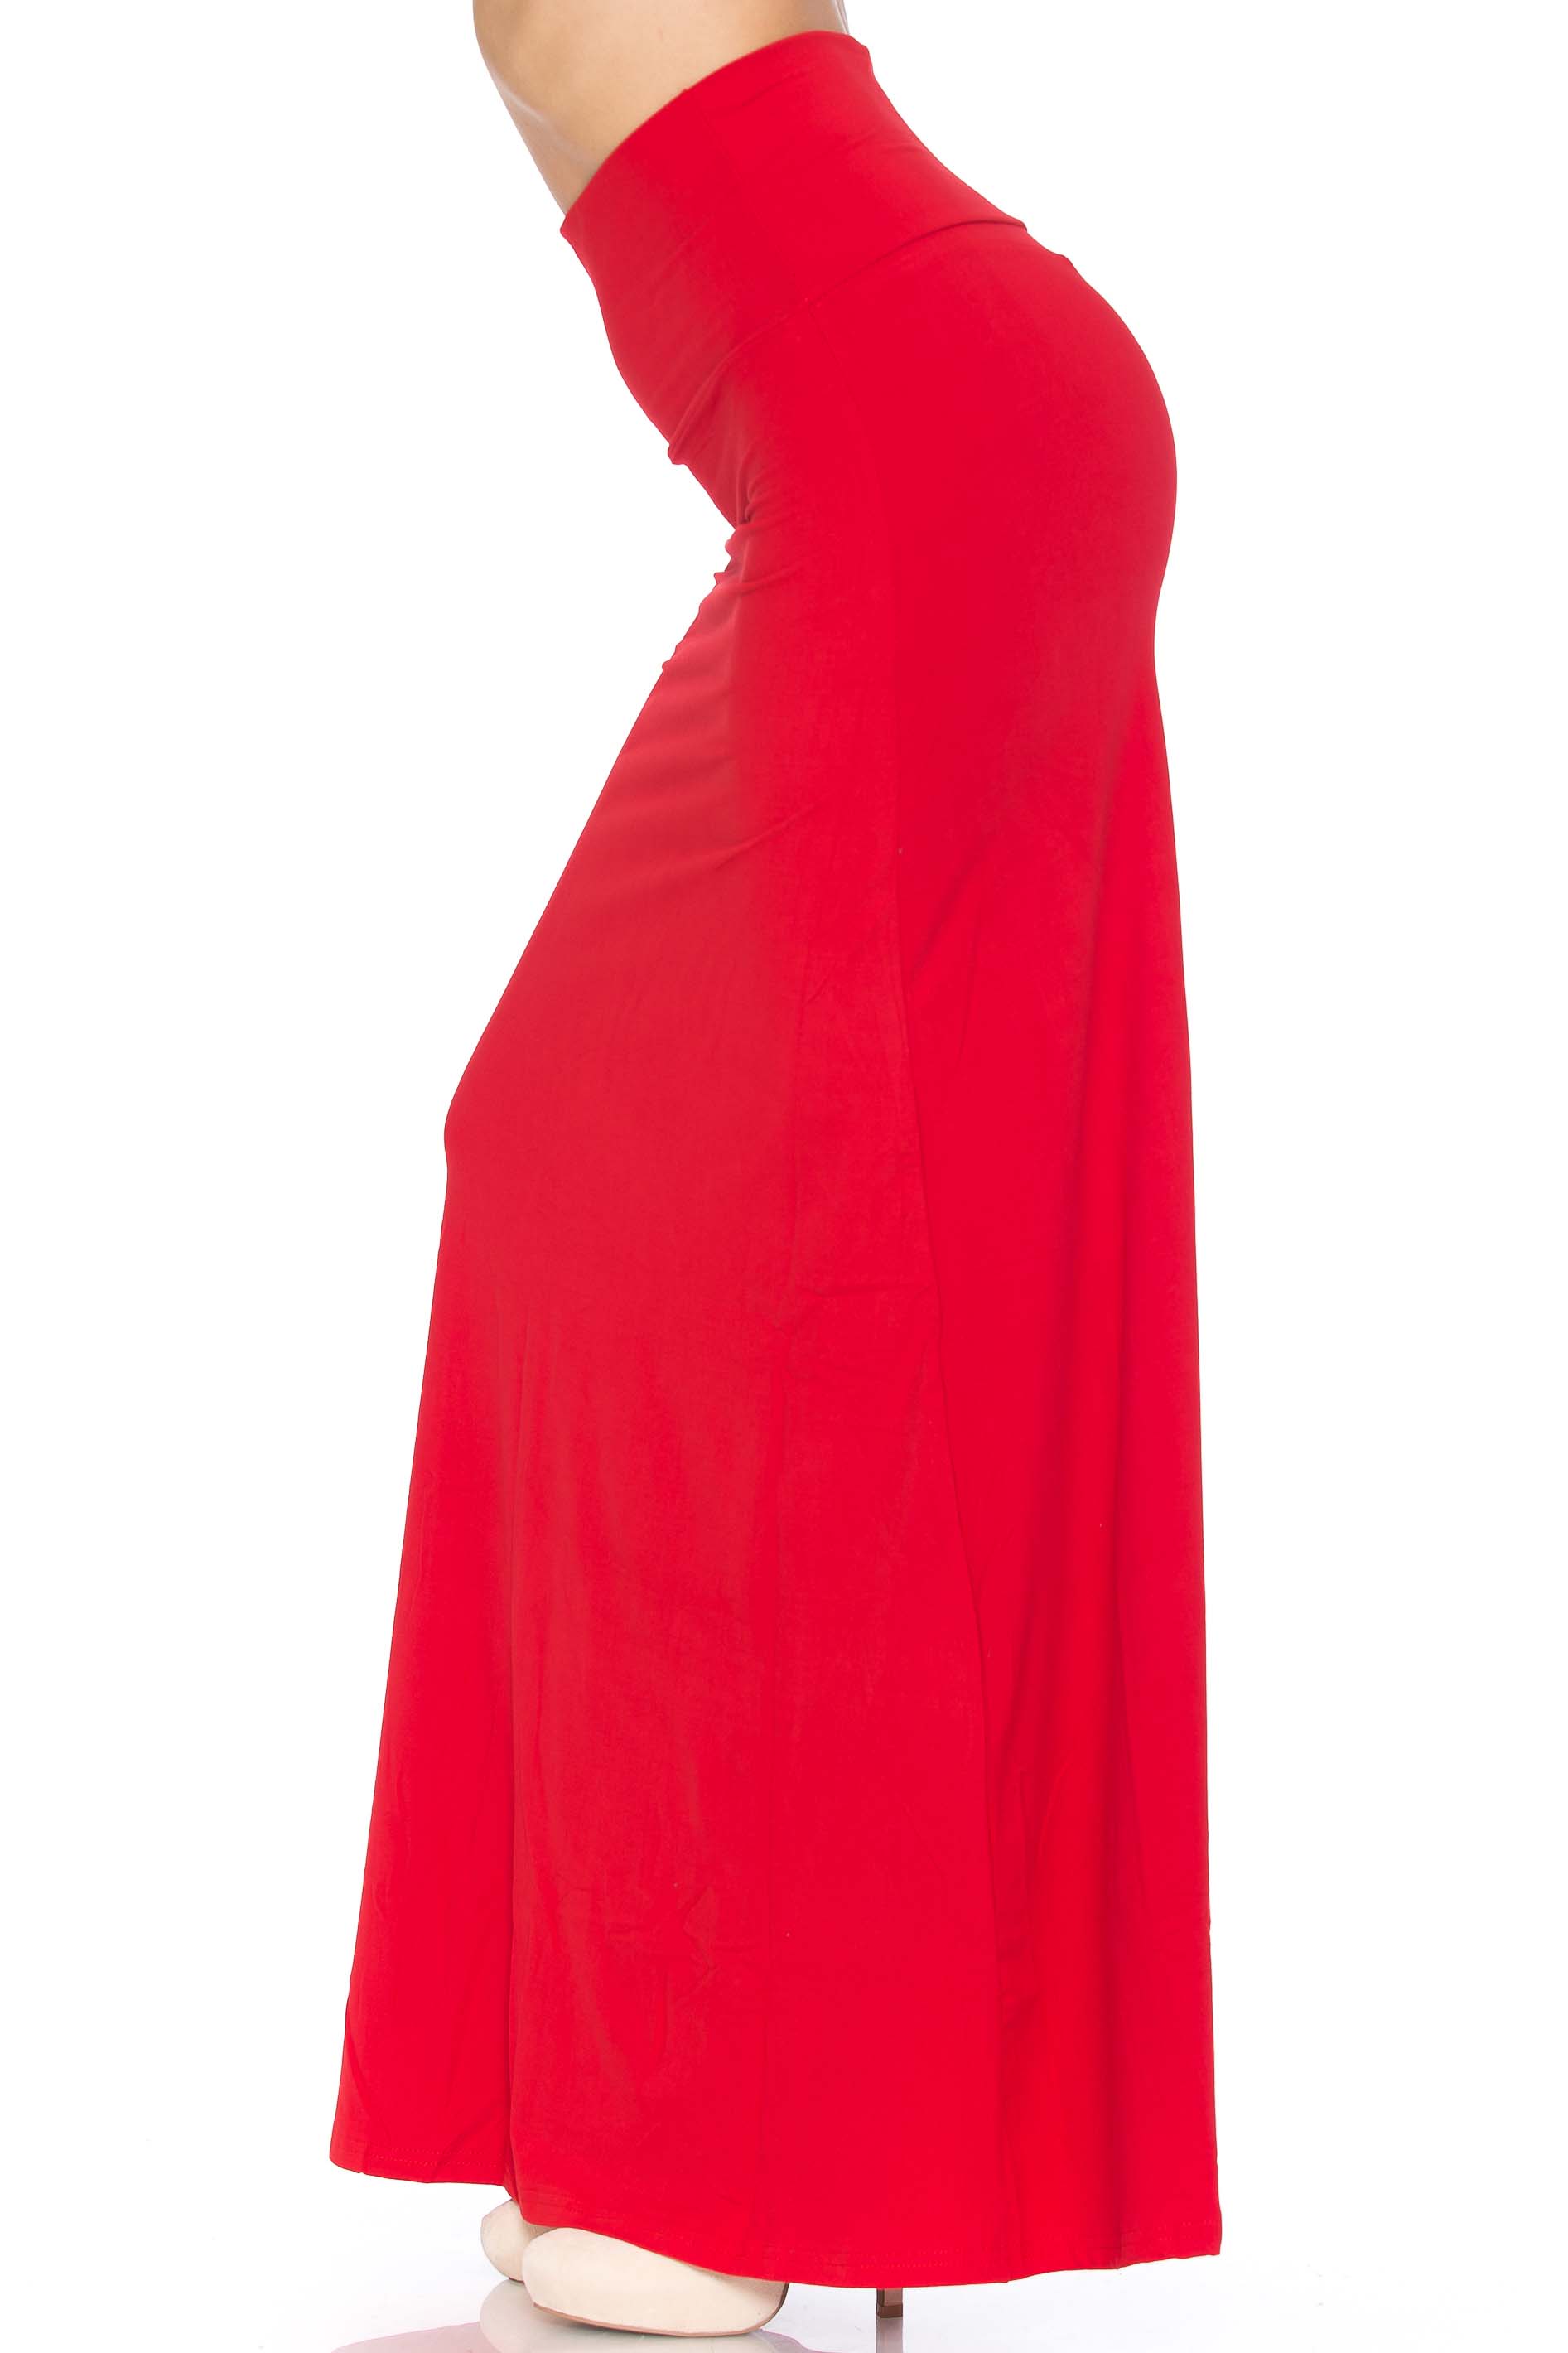 Wholesale Buttery Smooth Basic Red Plus Size Maxi Skirt